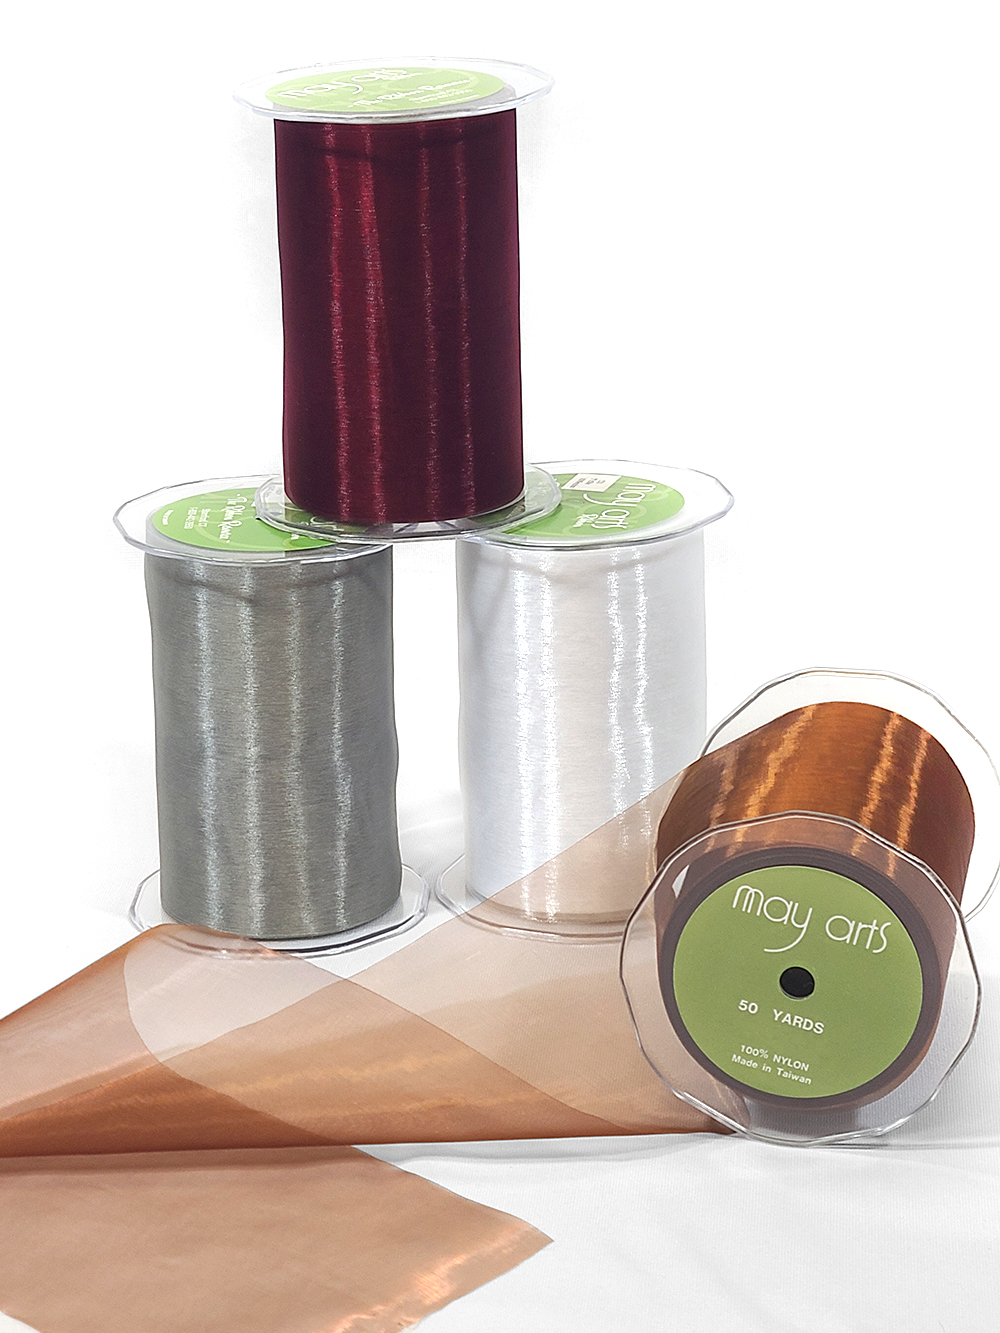 Sheers and Metallics Ribbon Collection - Shimmer and Style